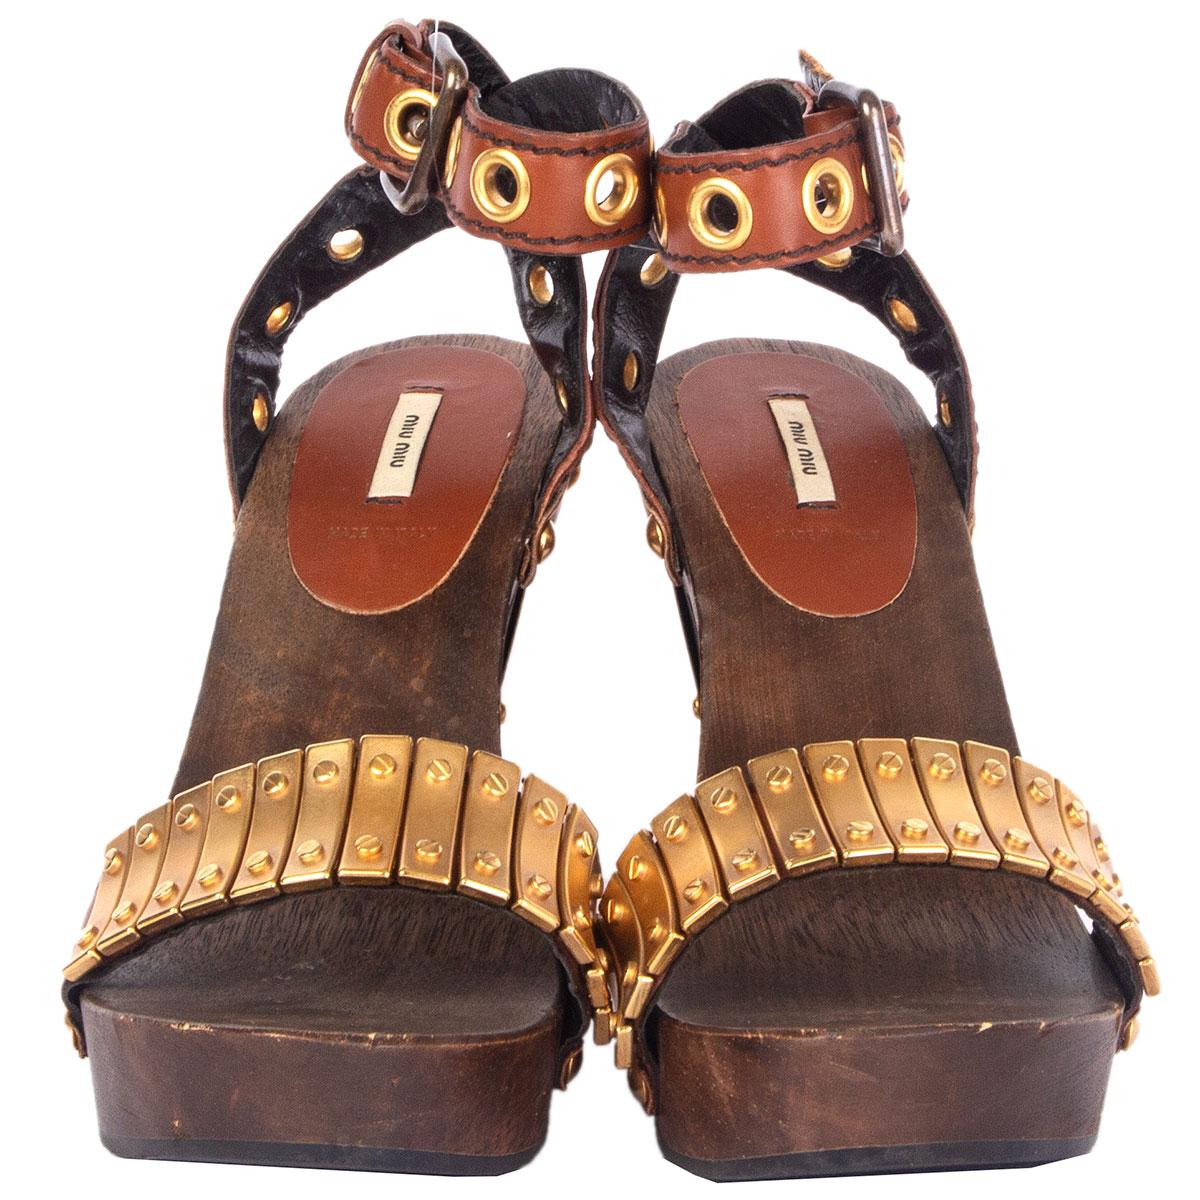 100% authentic Miu Miu sandals in brown wood and leather embellished with gold-tone metal plates and studs. Have been worn with some faint dents on the wooden platform. Overall in excellent condition. Come with dust bag. 

Measurements
Imprinted